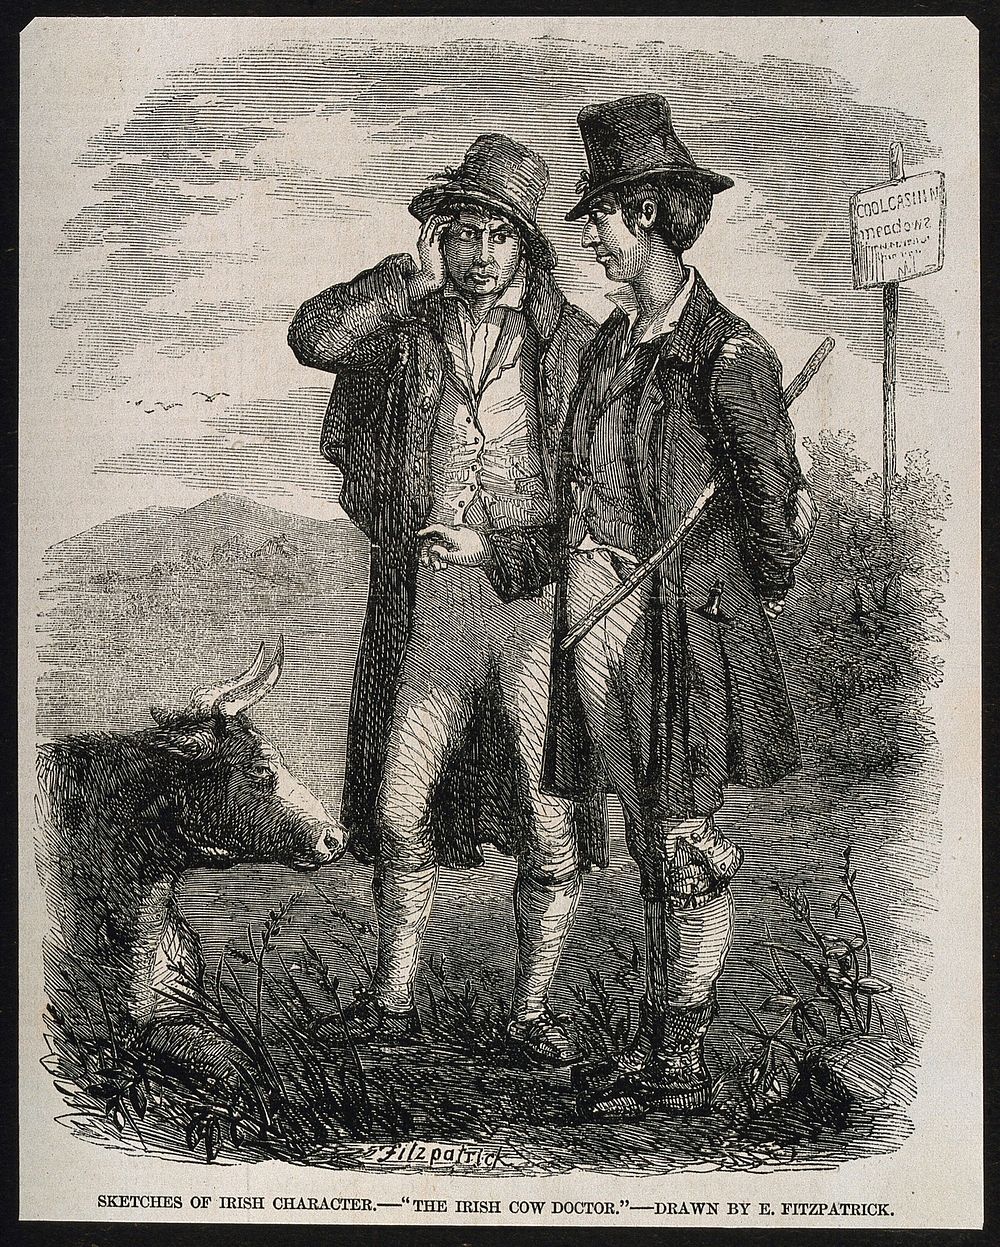 An Irish cow doctor points to a kneeling cow, observed by its concerned owner. Wood engraving by E. Fitzpatrick, 1850/1870.